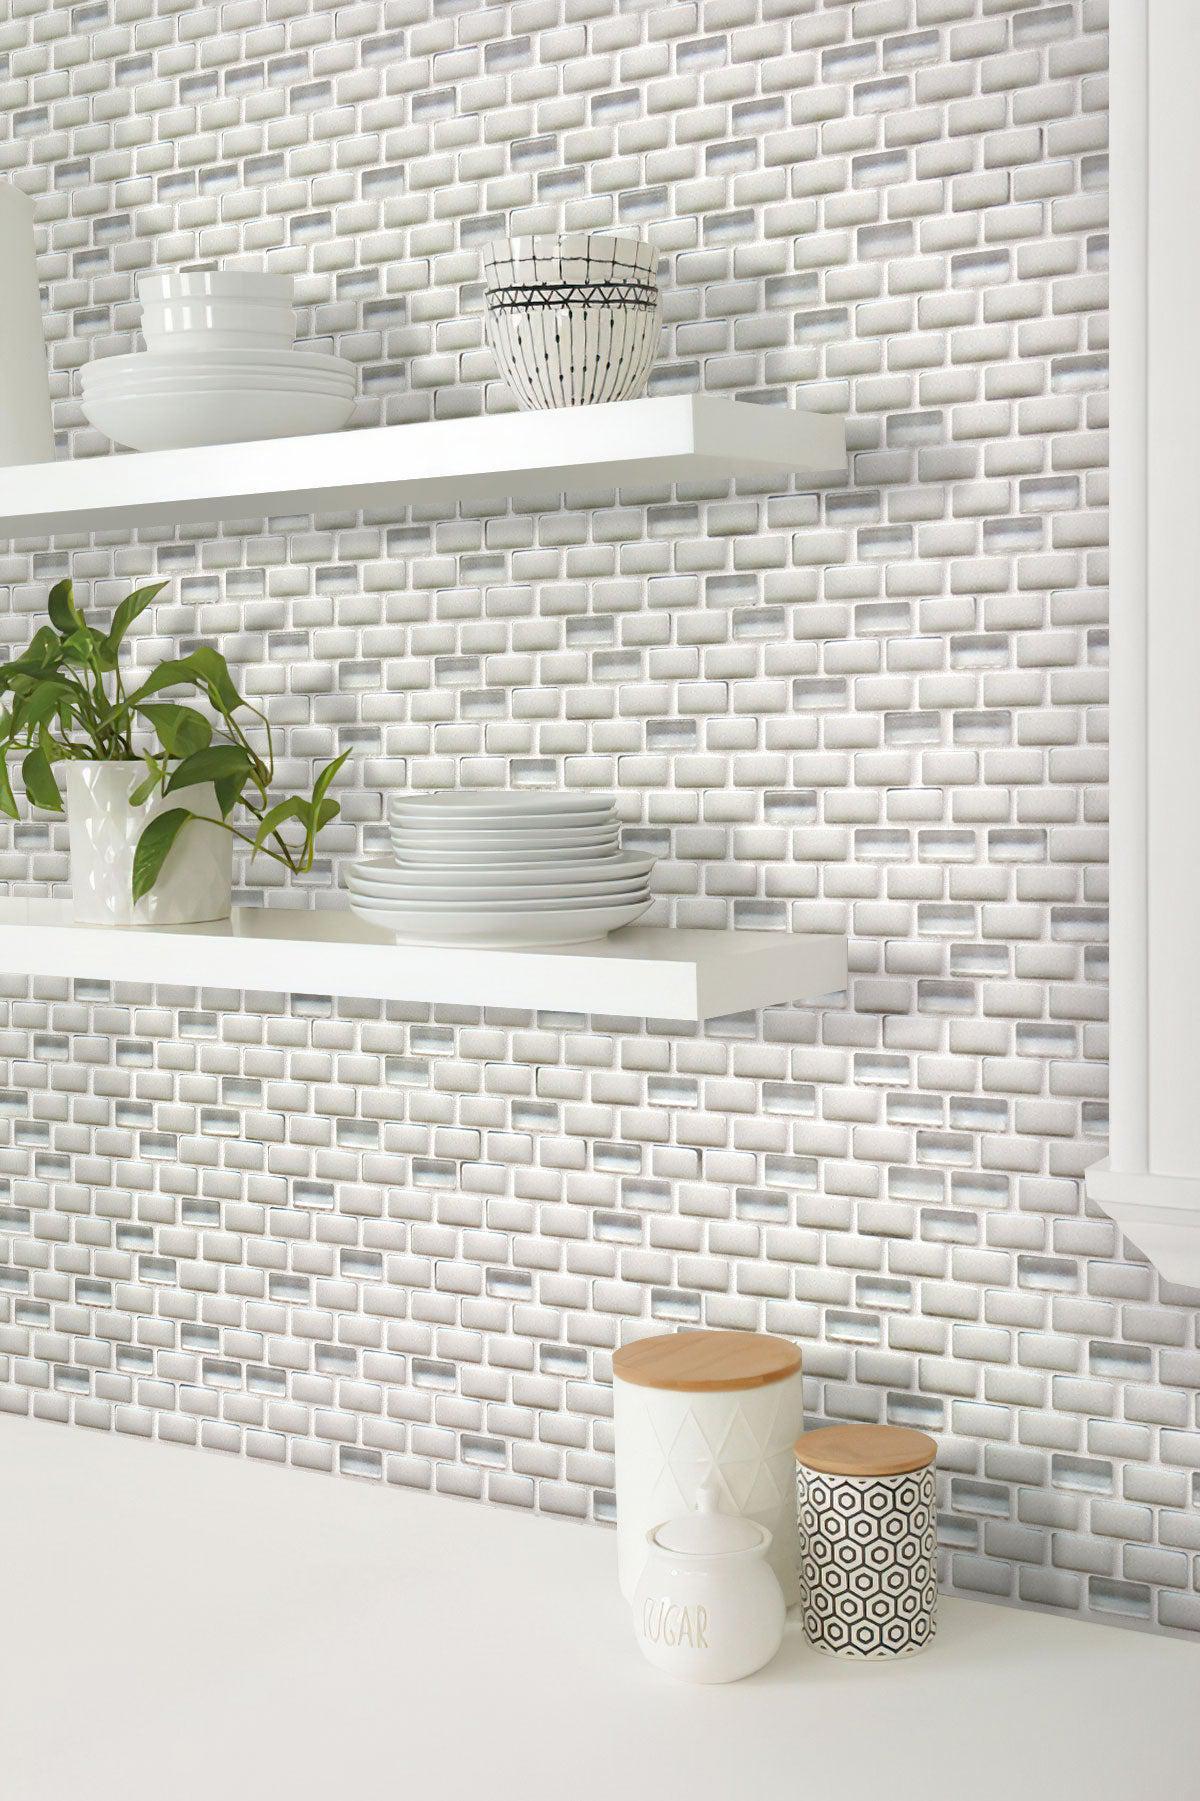 White Recycled Glass Brick Mosaic Tile Kitchen Wall with Shelves